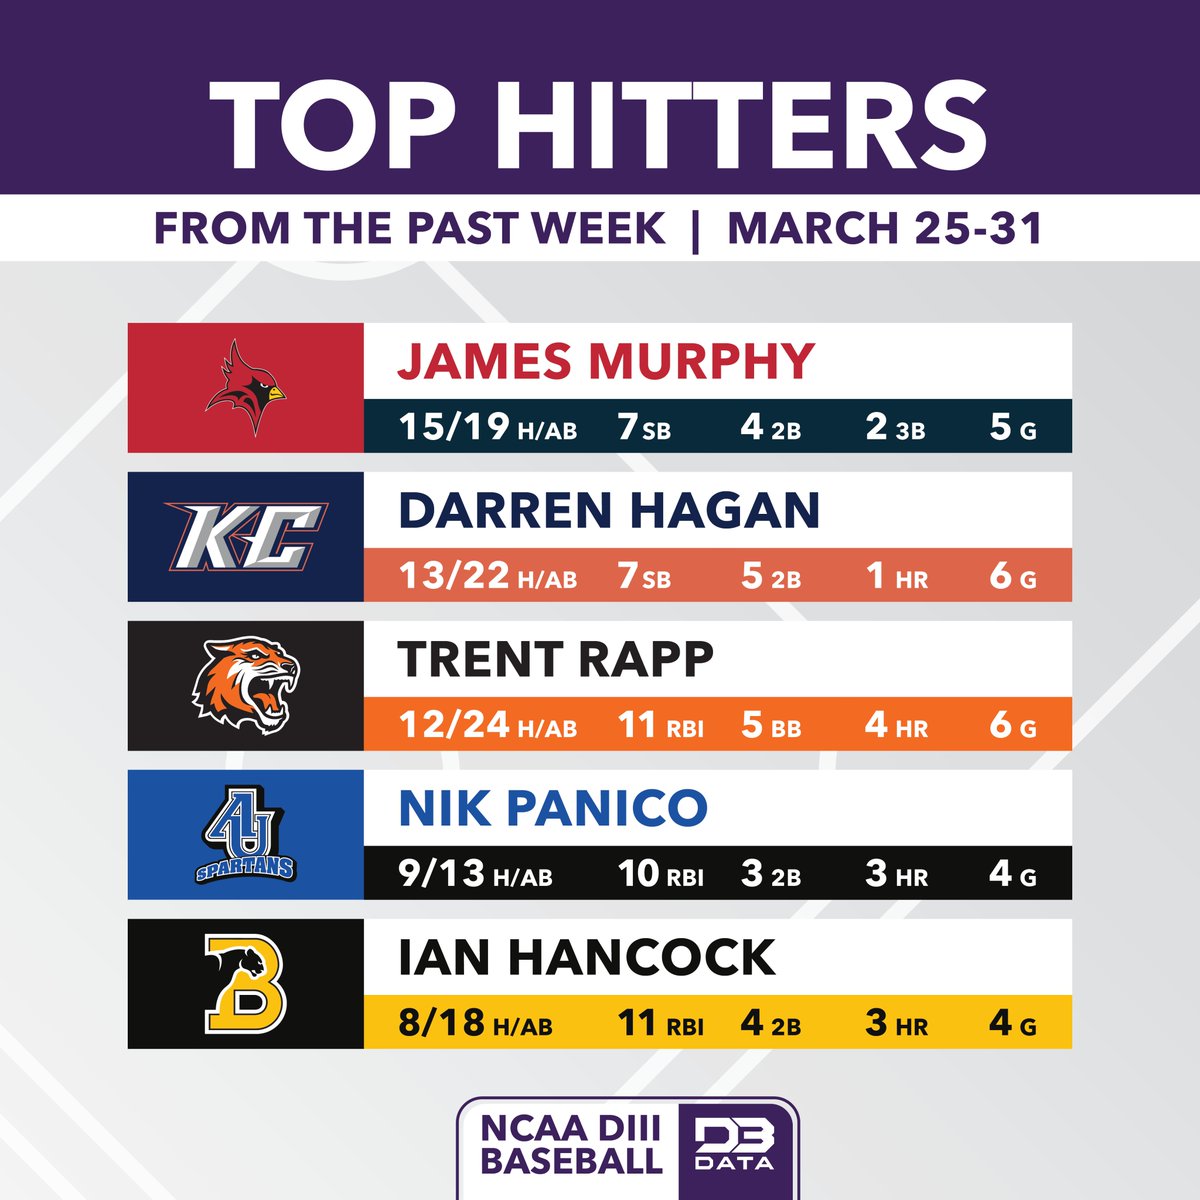 Top hitters in DIII Baseball from the past week. #d3data #d3 #d3sports #d3baseball